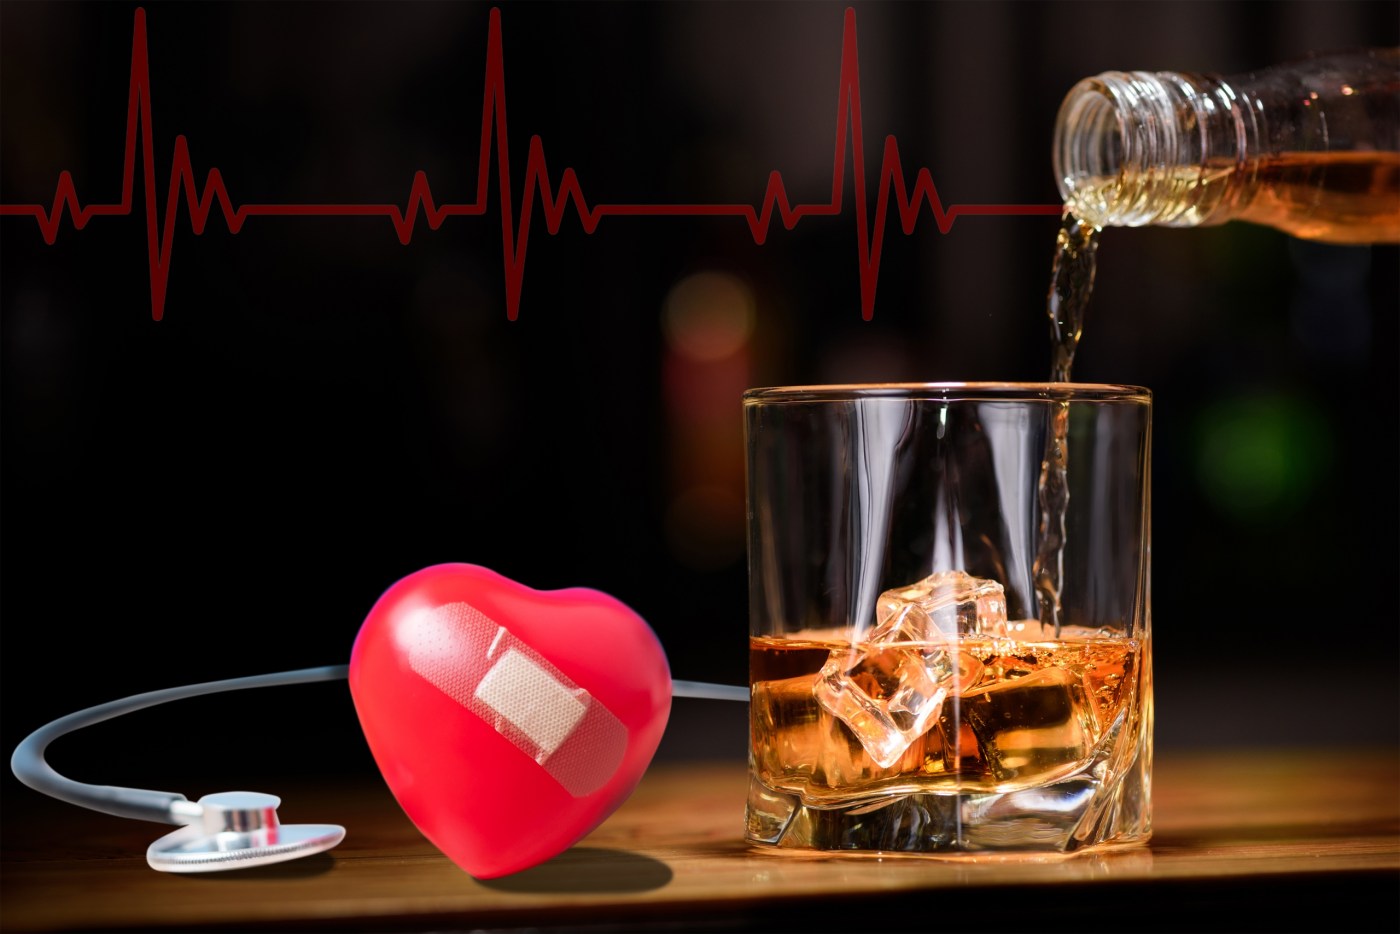 A new VA study supports prior findings that a moderate amount of alcohol is linked with reduced risk later in life for hospitalization or death. But the study’s lead author doubts that even a small amount of alcohol can benefit one’s health.